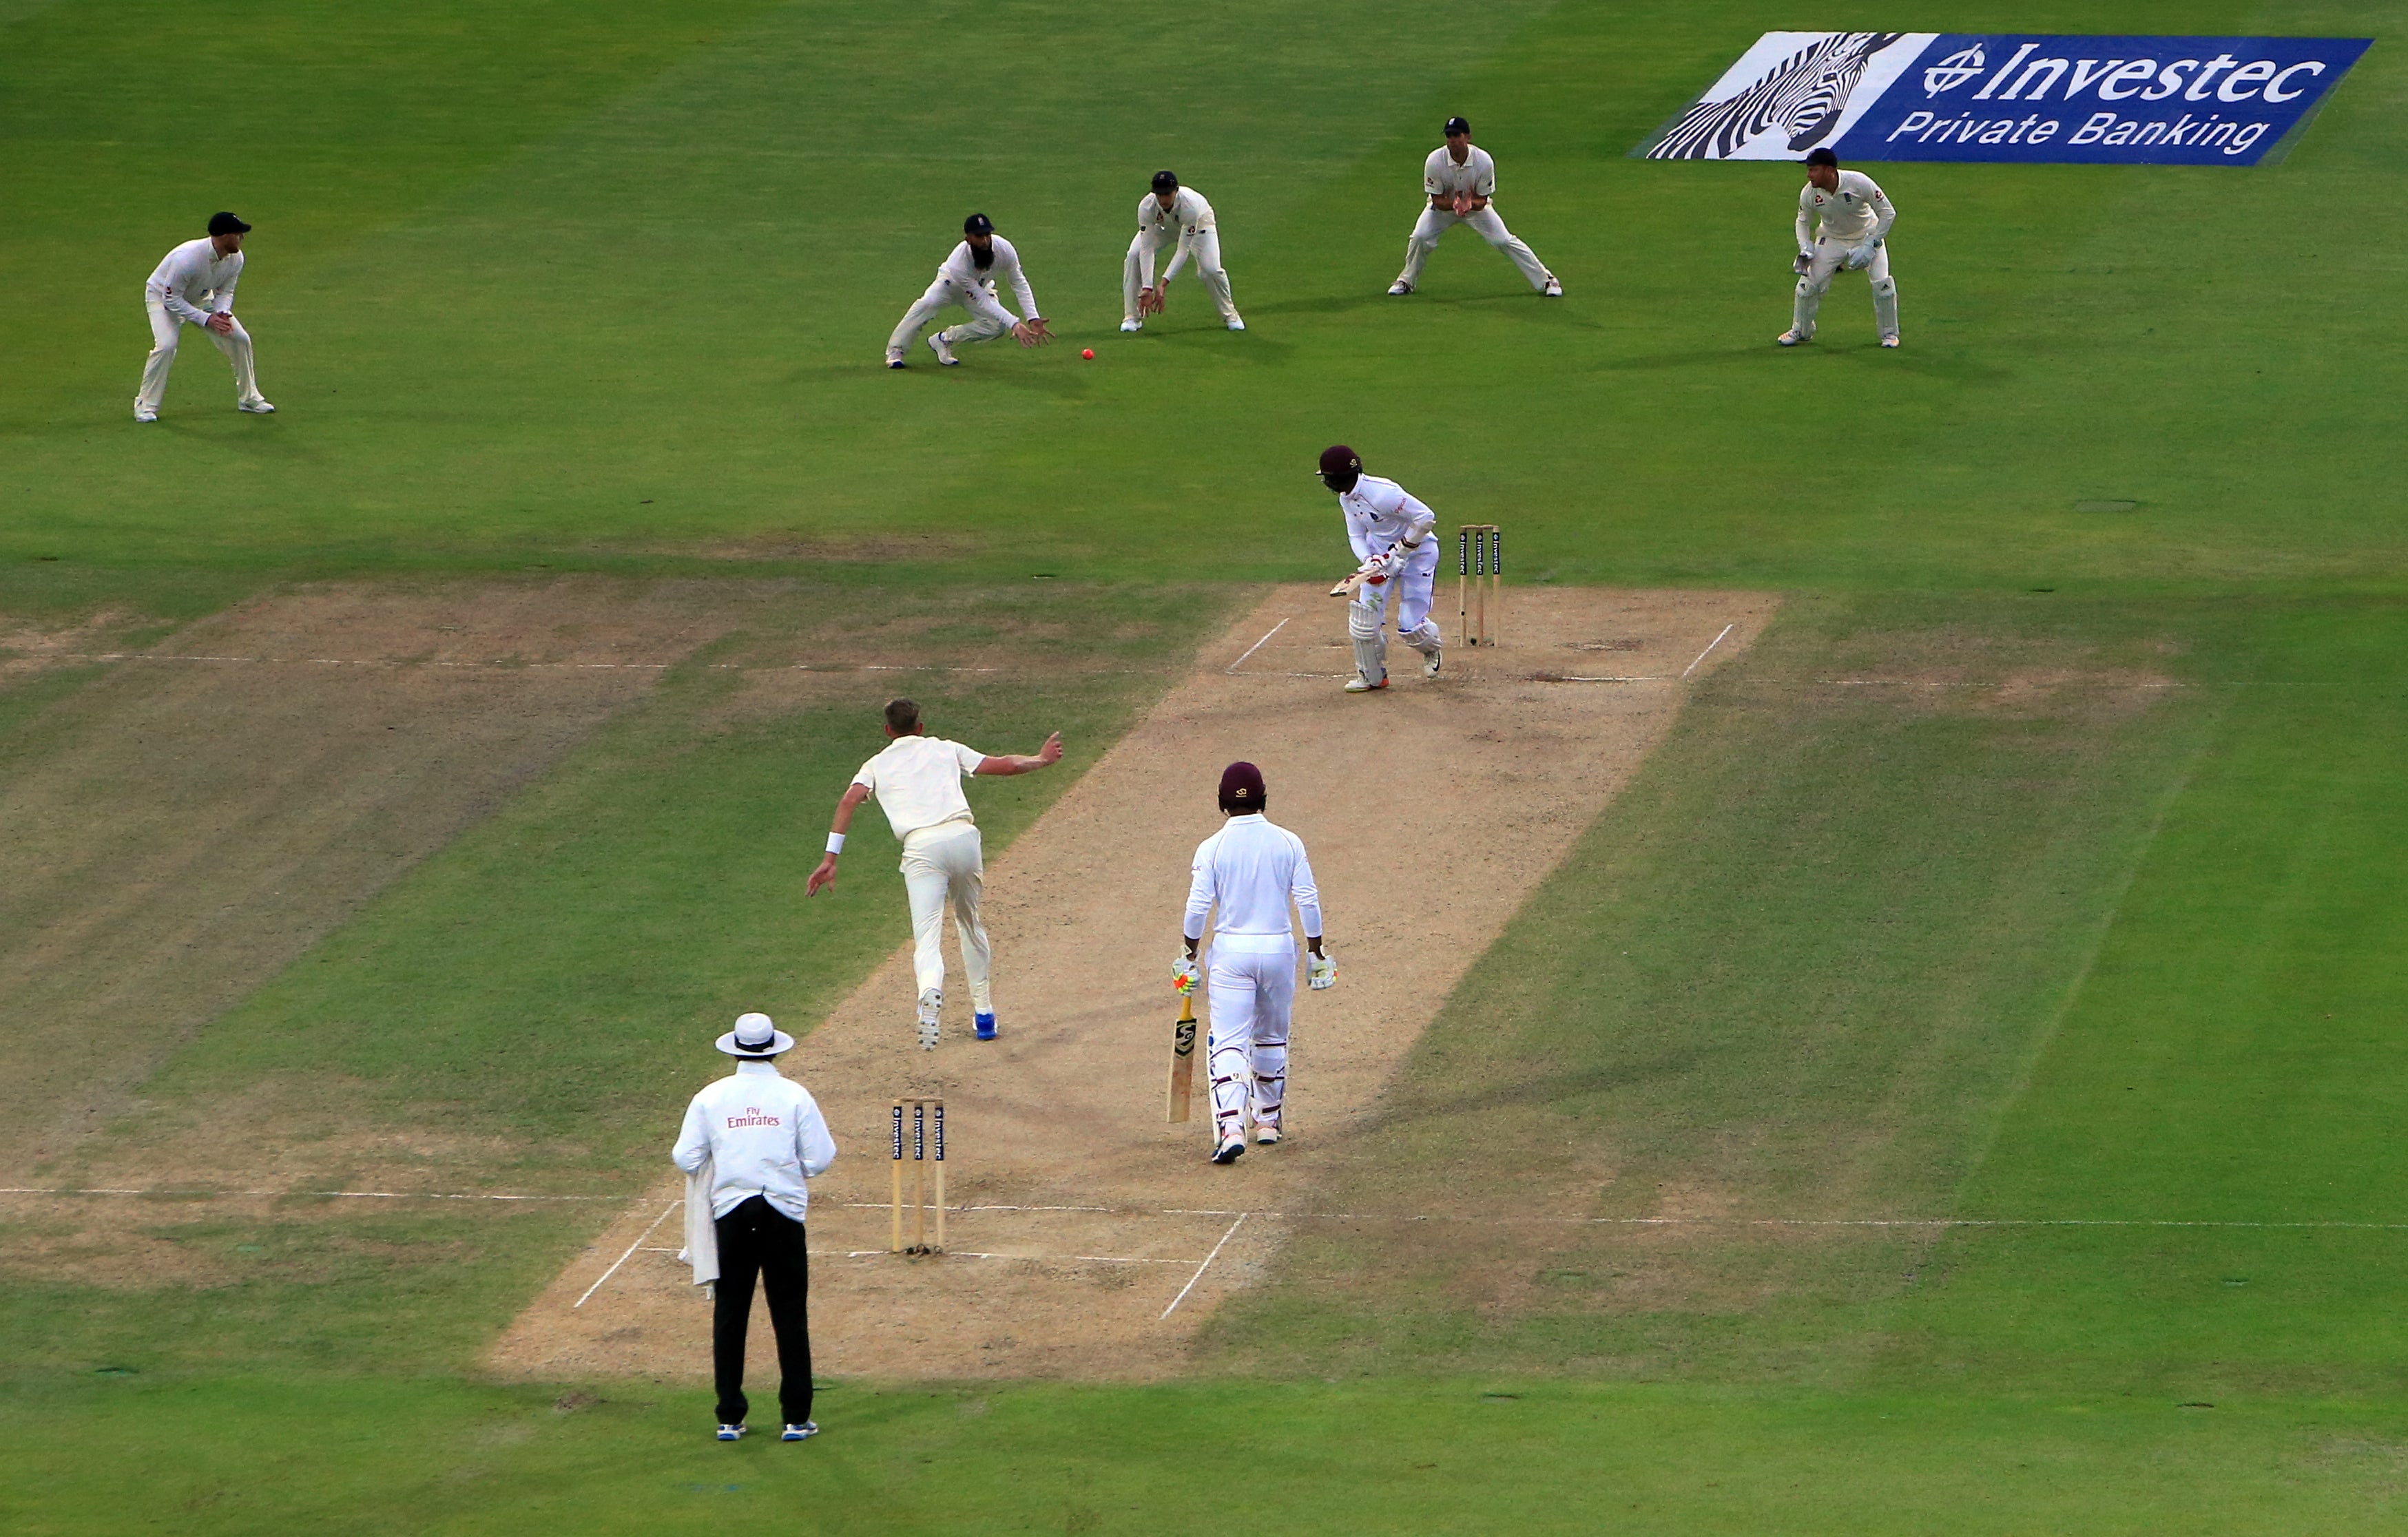 England demolished West Indies in the first ever day-night test in this country (Nick Potts/PA)